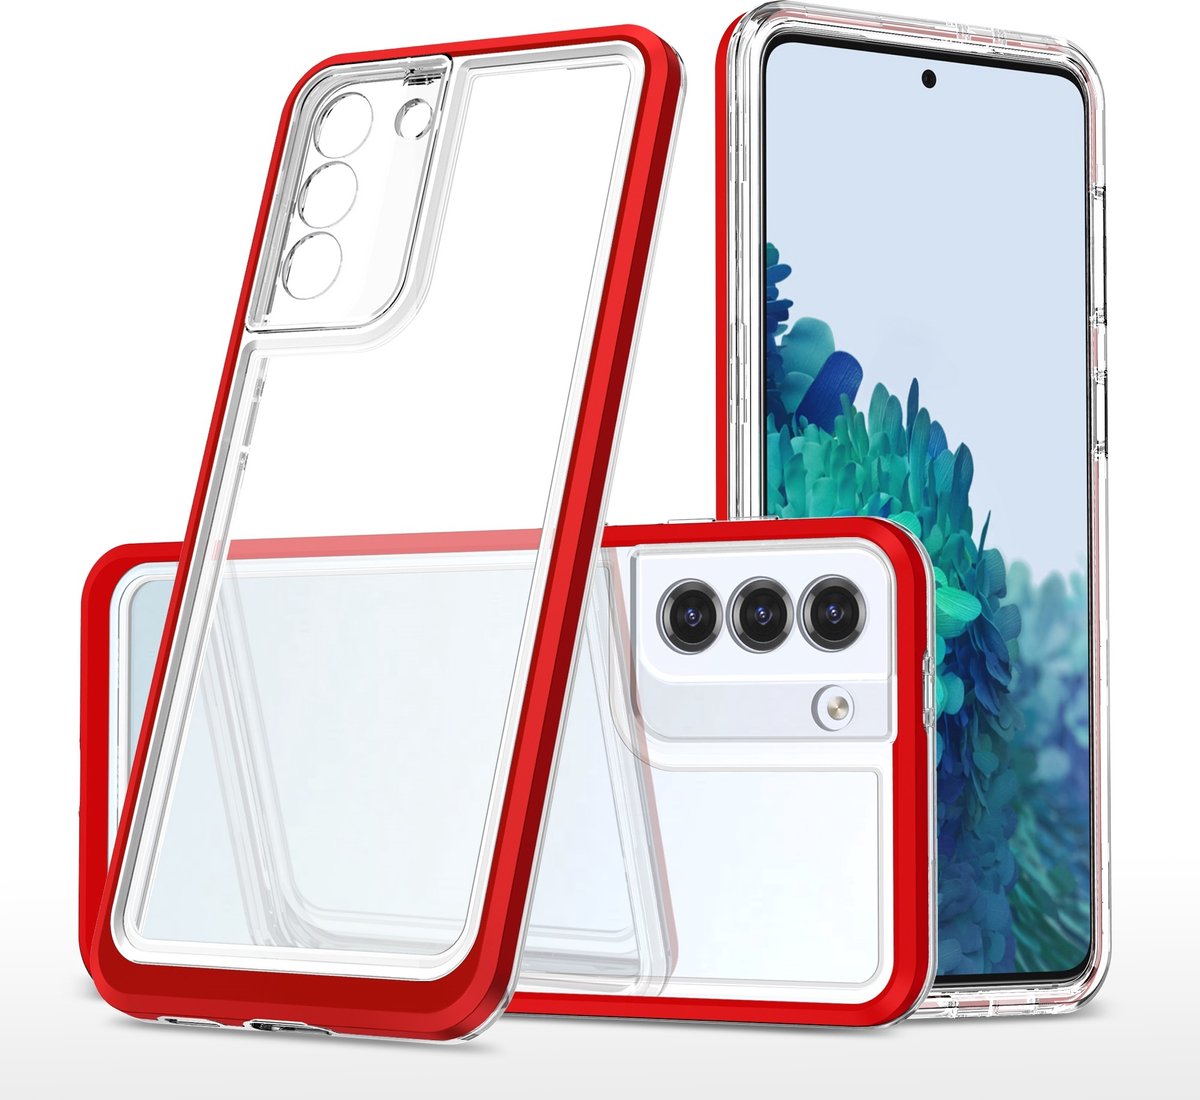 Samsung GalaxyS21 FE hoesje backcover Transparant met bumper case – Rood – oTronica